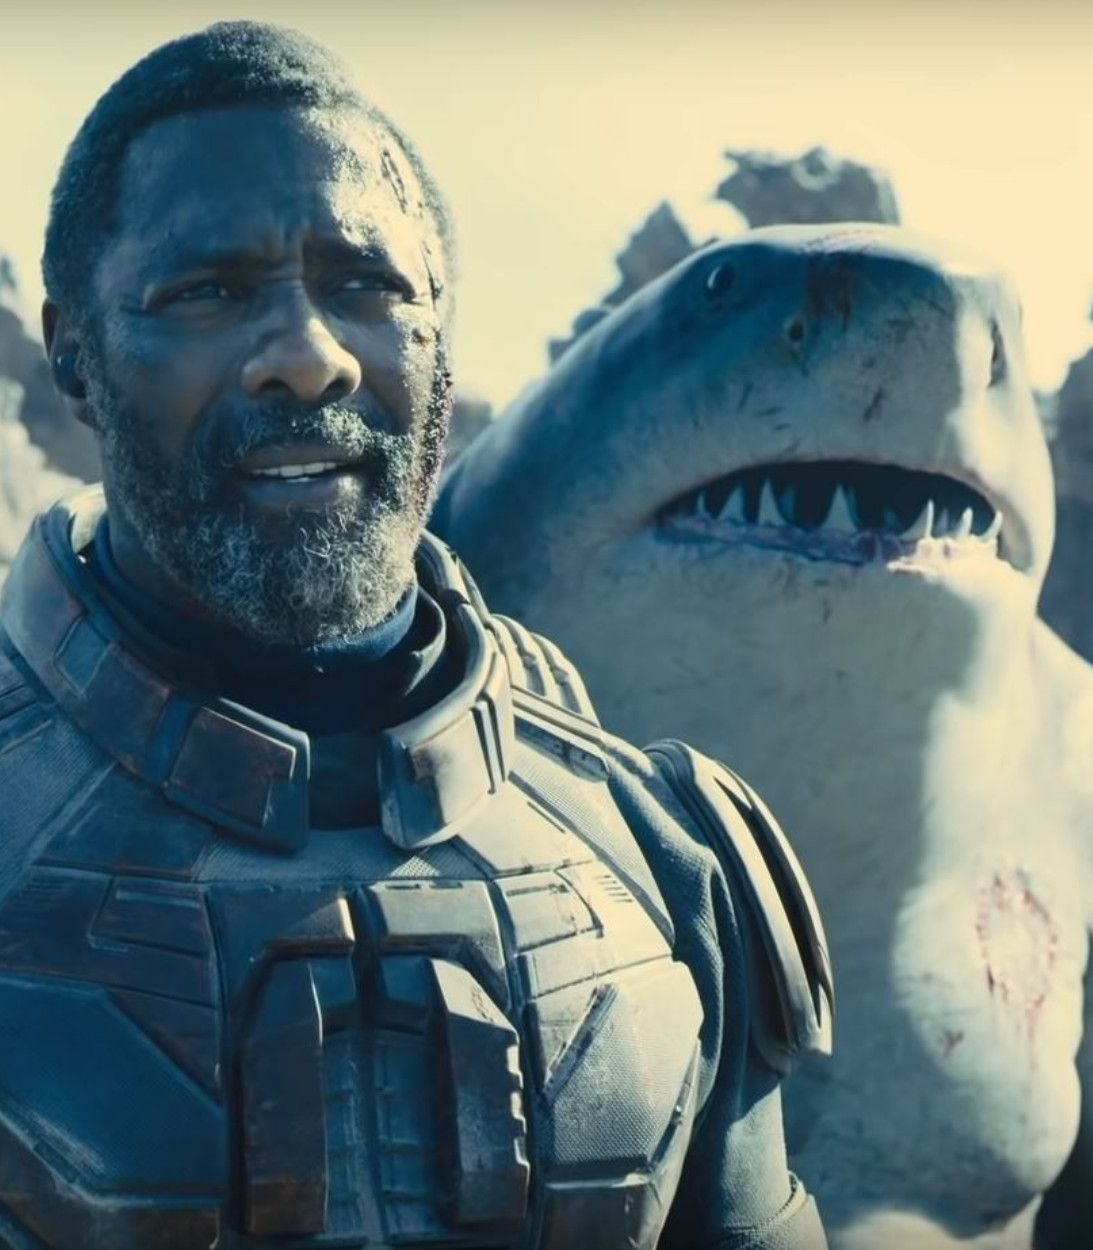 Idris Elba as Bloodsport, Steve Agee and Sylvester Stallone as KIng Shark The Suicide Squad Vertical